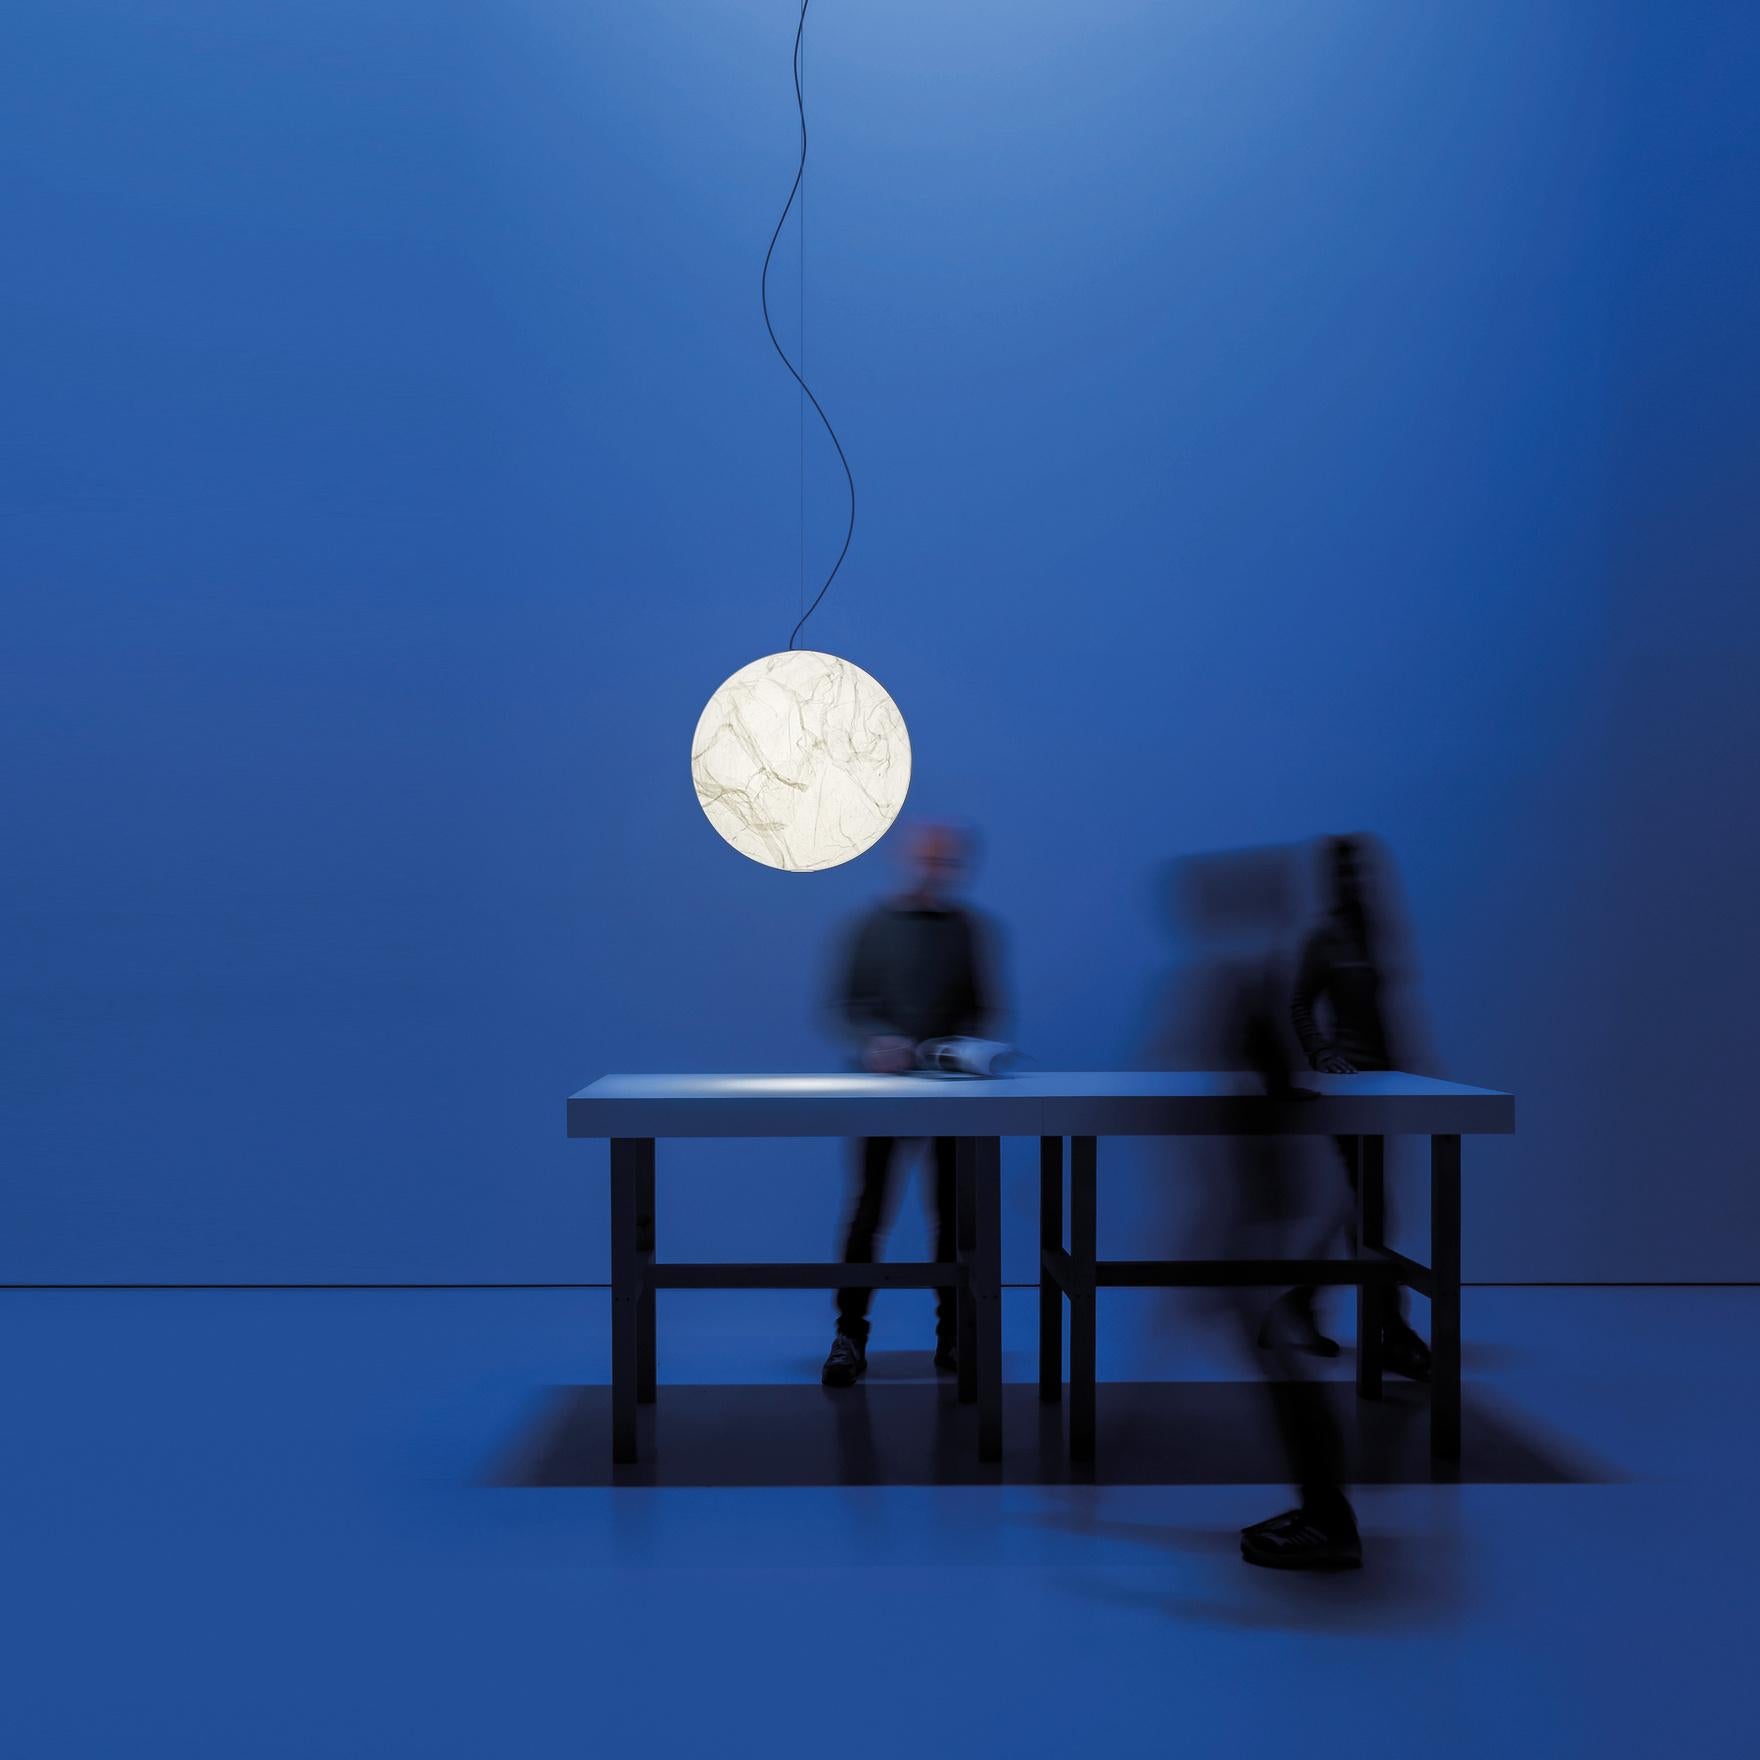 Moon was created from the dream of bringing the moon inside your own home.
The hand-made Japanese paper surface makes every lamp unique. 
Table and floor version available.

Available in different sIzes: Small, medium, Large

Diameter 78.74